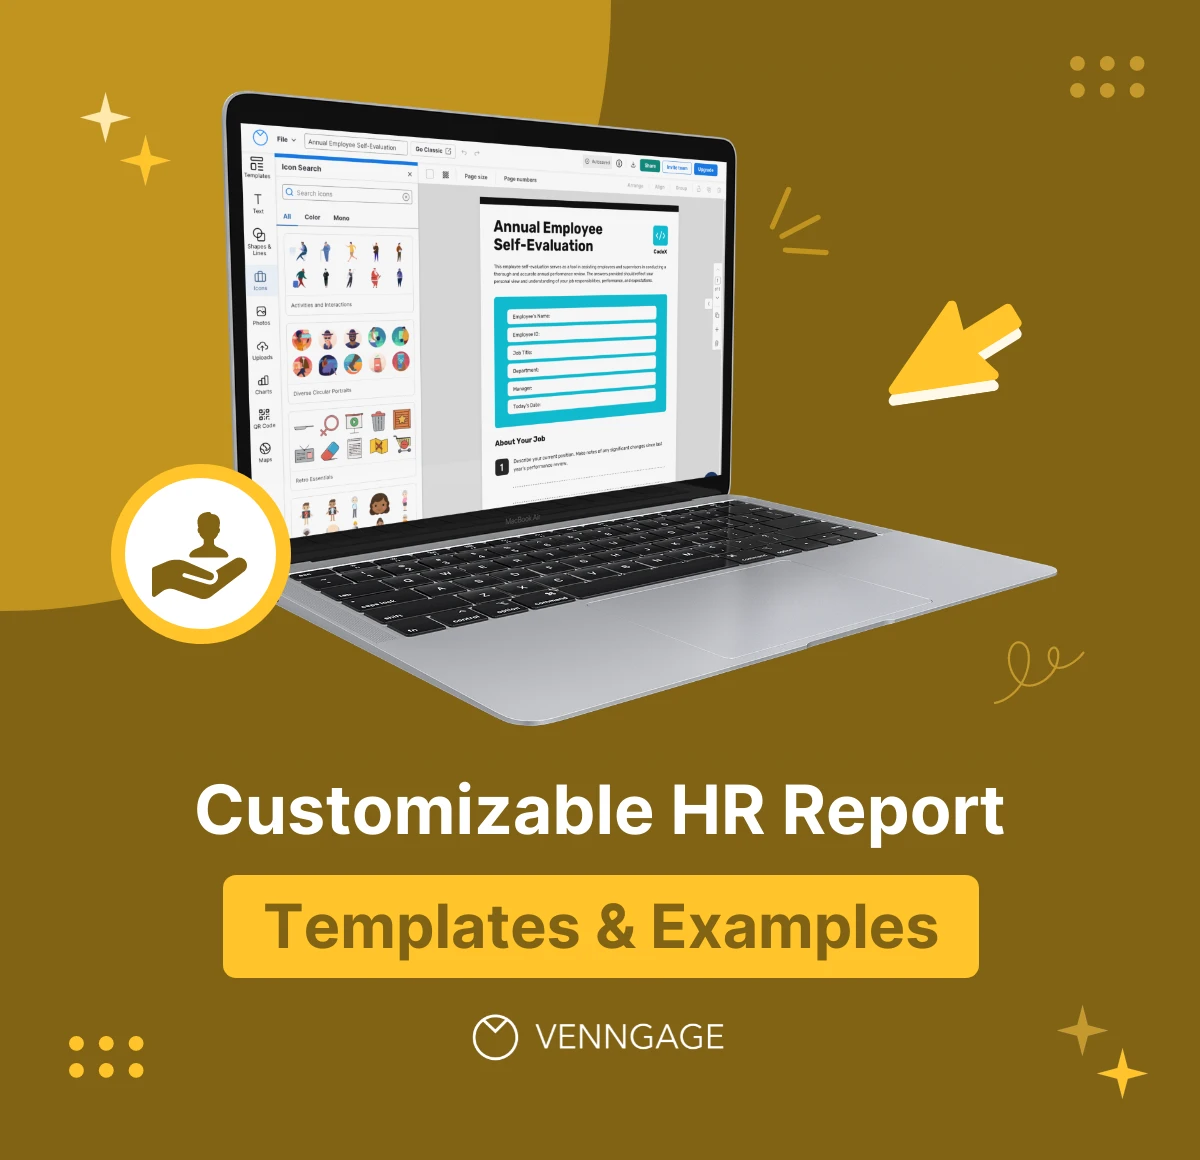 Improve your hiring strategies with better HR reporting software